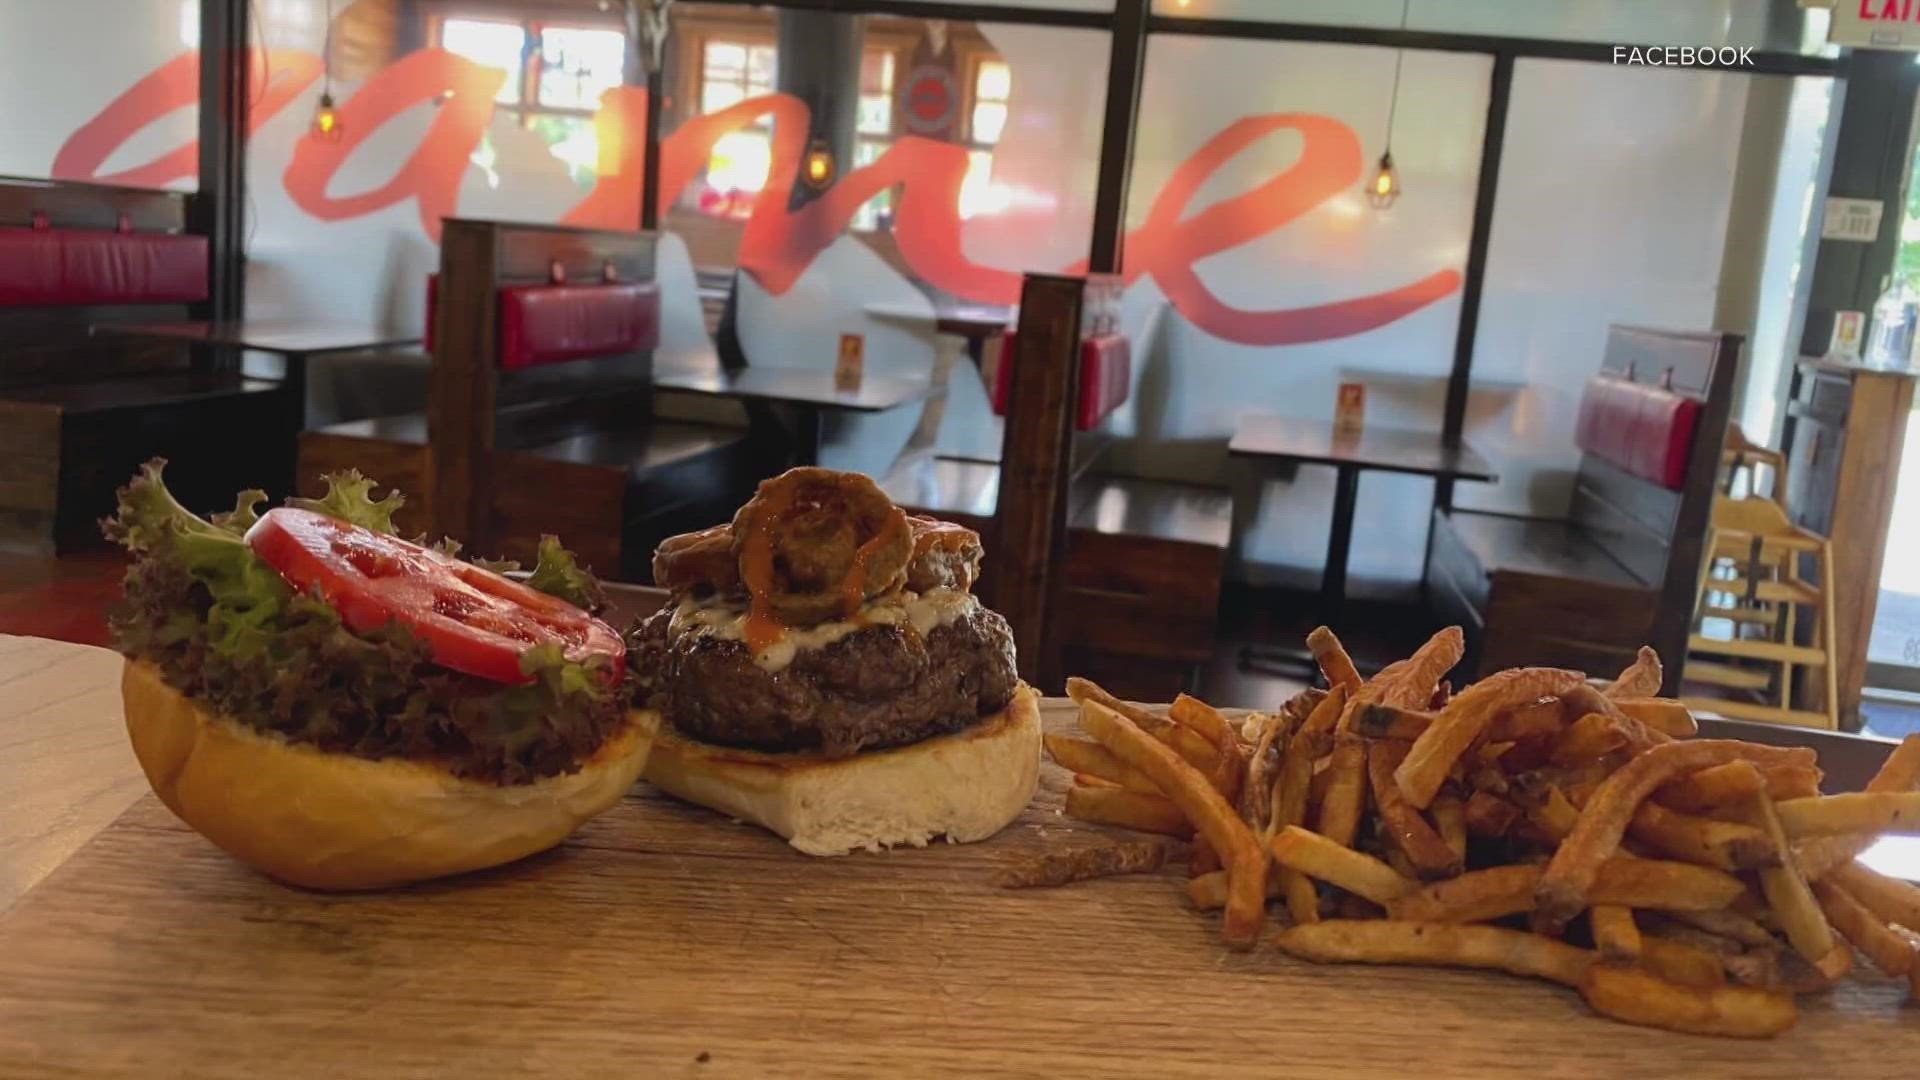 With staple and rotating meat options such as kangaroo, bison, elk, yak and camel, Game is certainly the most adventurous stop on Louisville's Burger Week list.